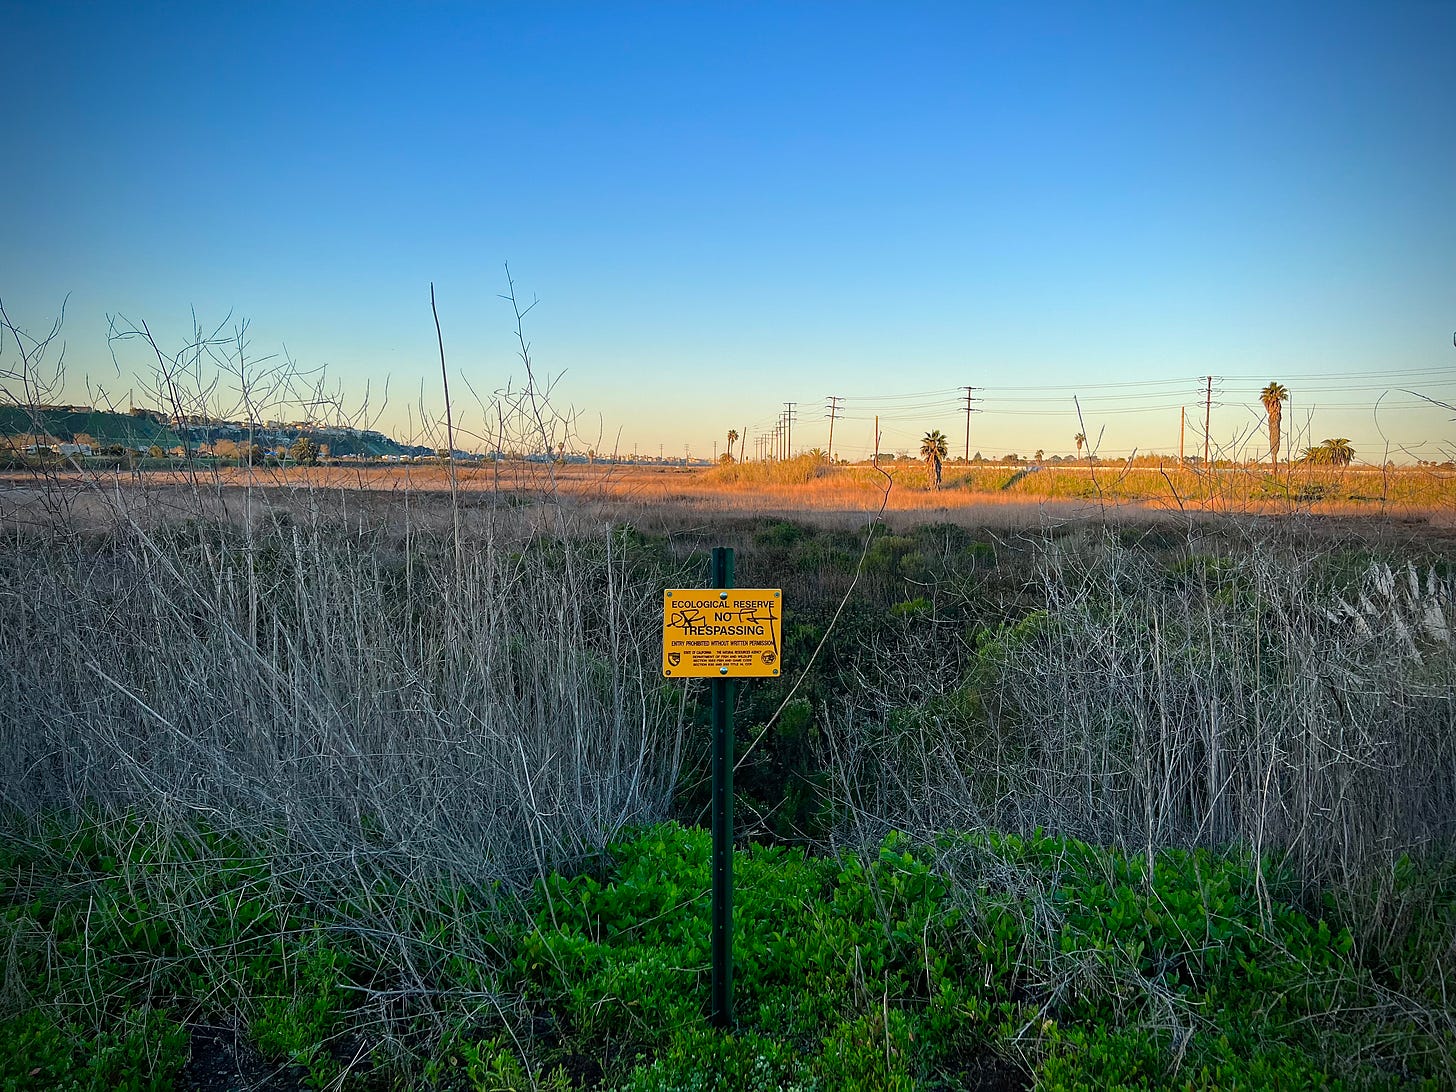 Picture of a California wetland, with a yellow sign in the foreground that says "Ecological Reserve - NO TRESPASSING"